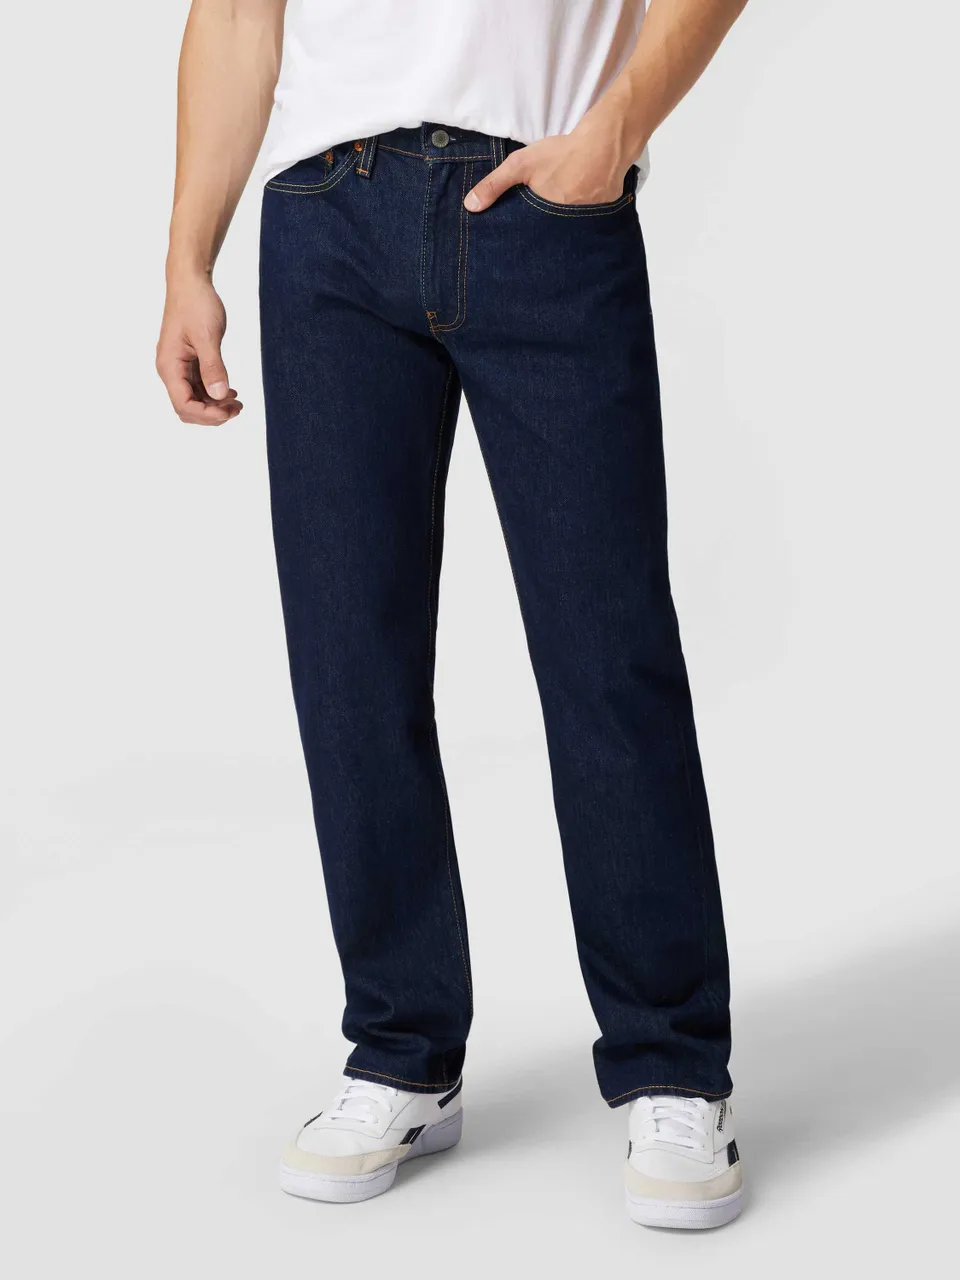 Regular Fit Jeans mit Stretch-Anteil Modell Modell "514 CHAIN RISE"